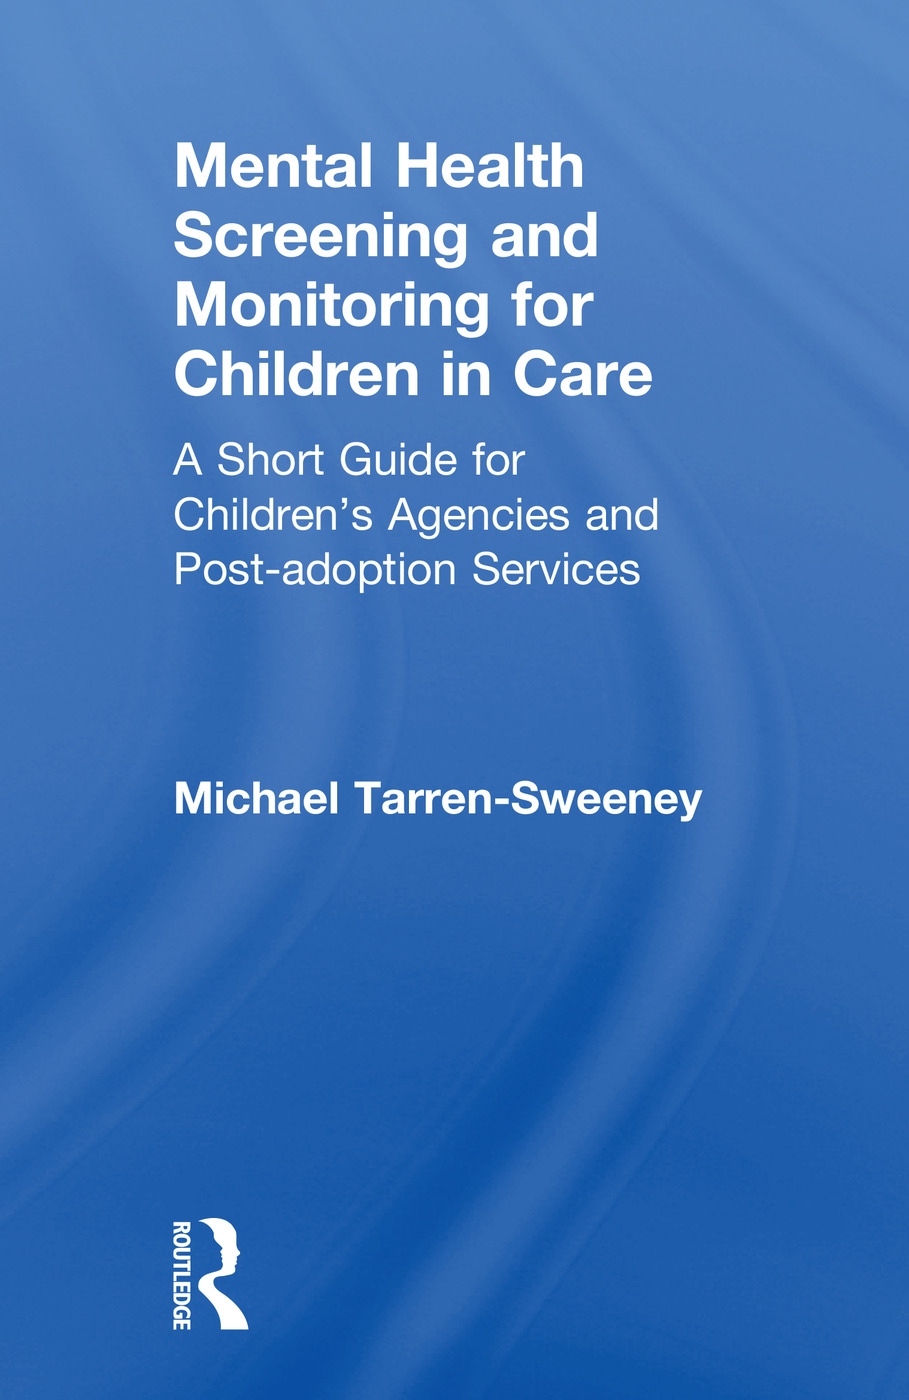 Mental Health Screening and Monitoring for Children in Care: A Short Guide for Children’s Agencies and Post-Adoption Services